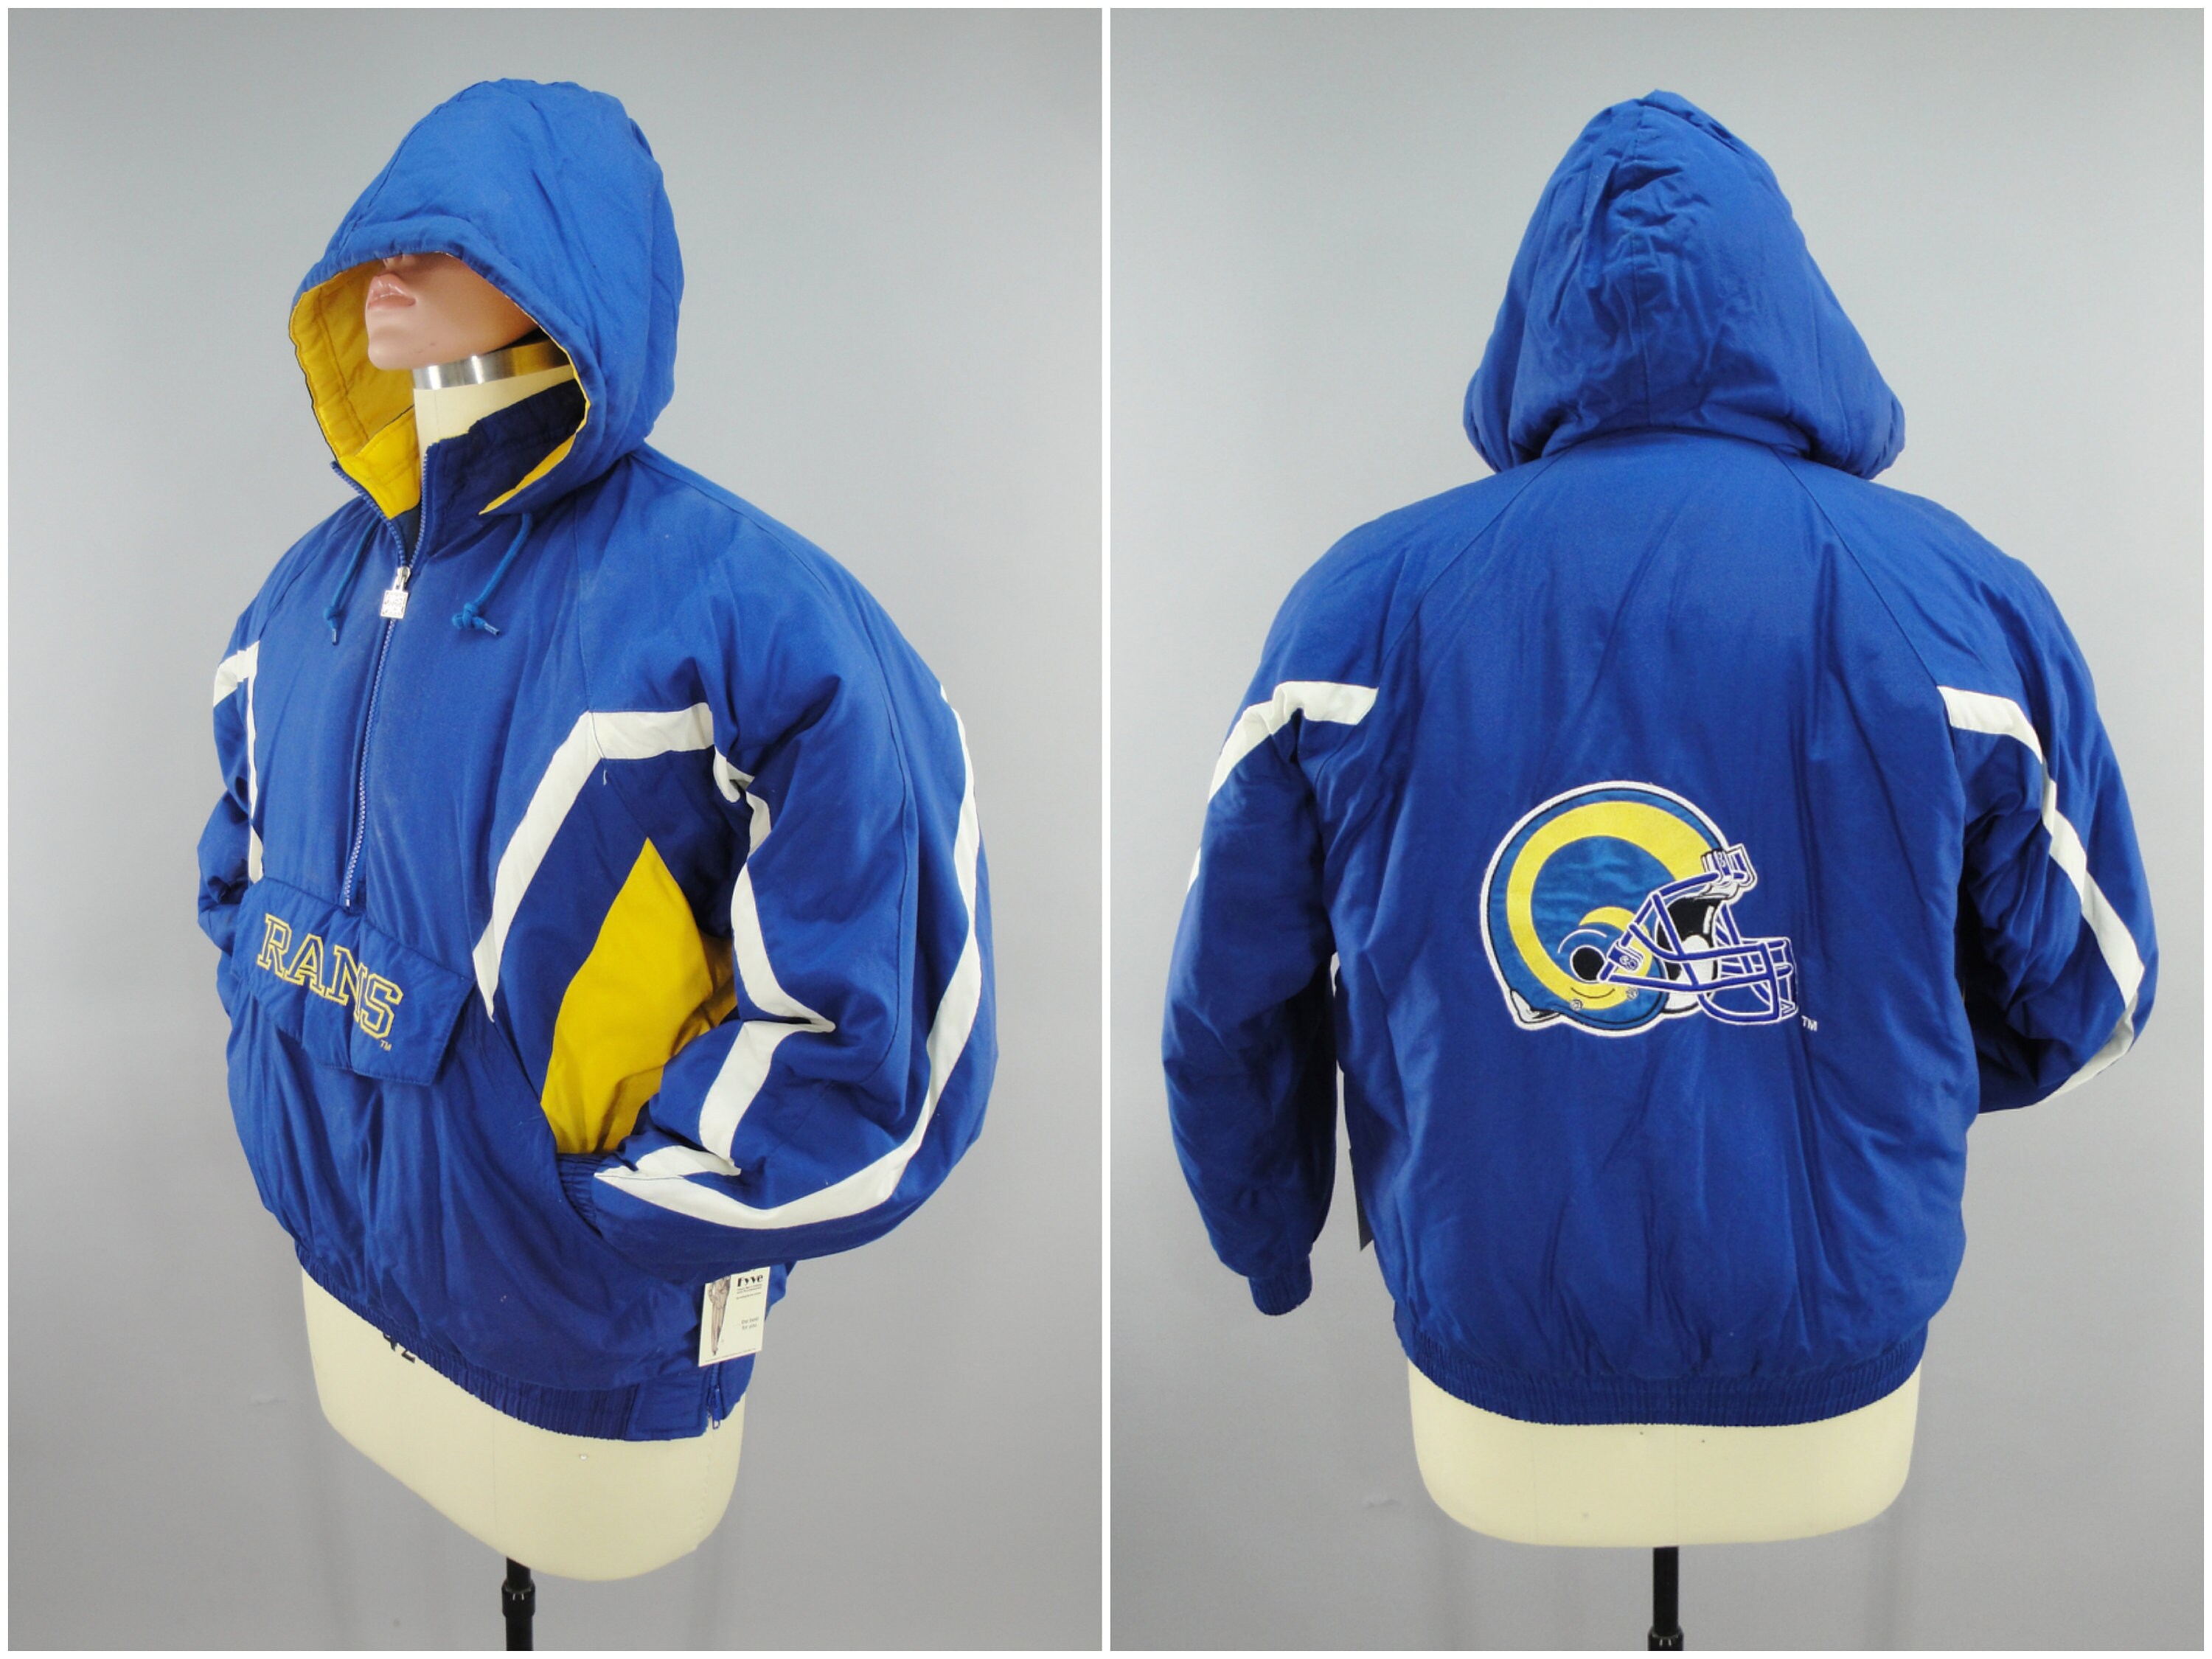 1980S Vintage Los Angeles Rams Nfl Football Sideline Jacket By Gameday First Pick Sports Mens Size Large, Made in Korea, Hooded Winter Parka